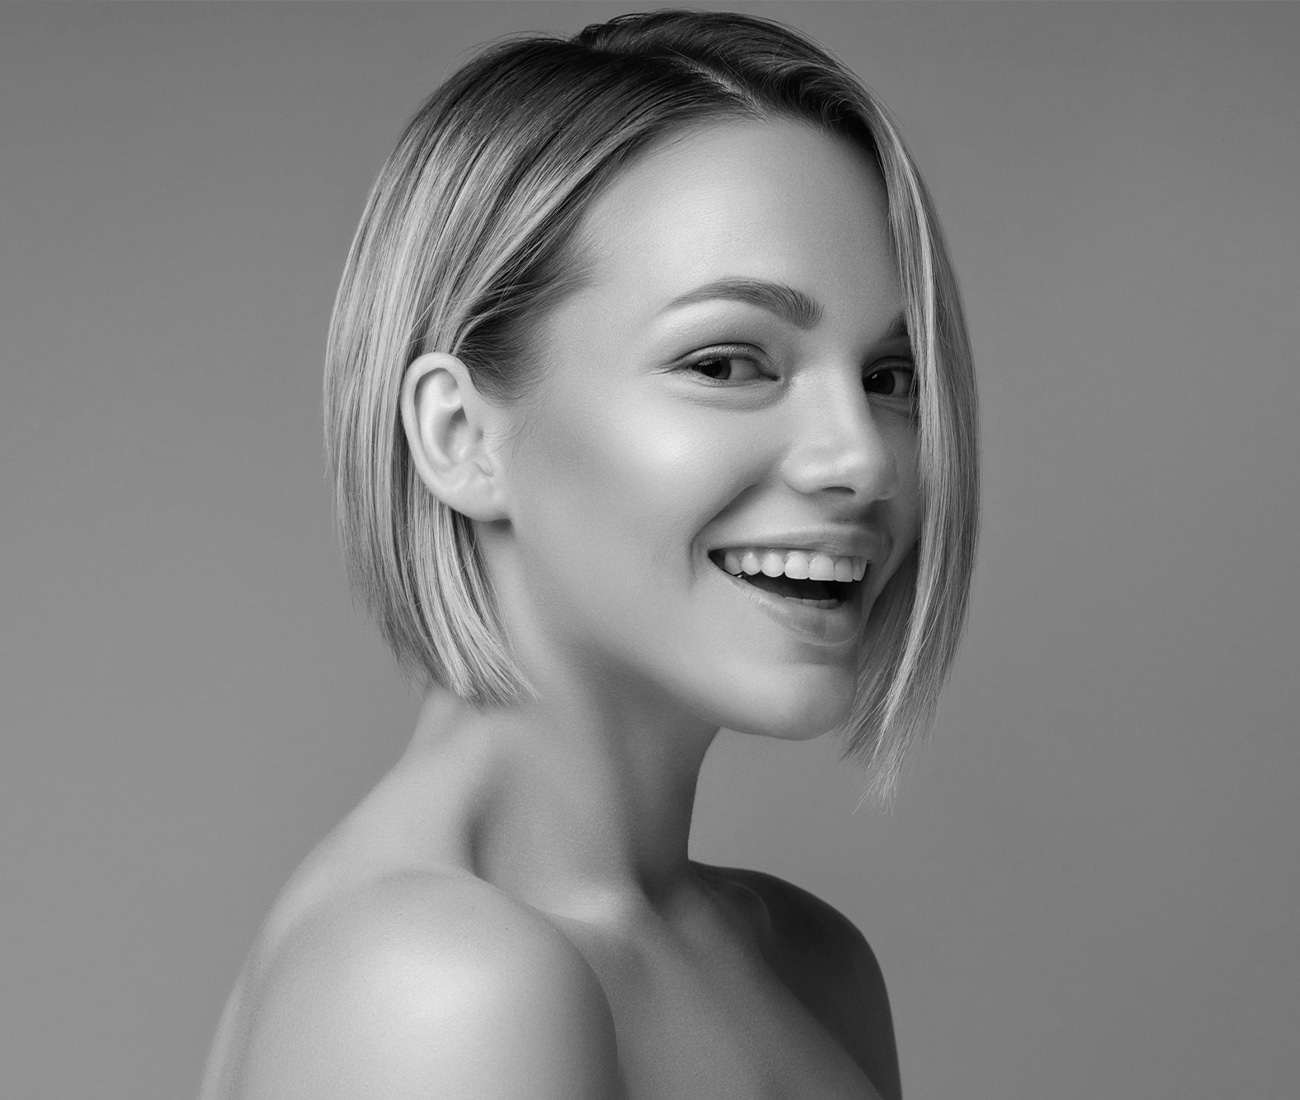 Woman With Short, Cropped Blond Hair Smiling For Camera, Black And White Photo